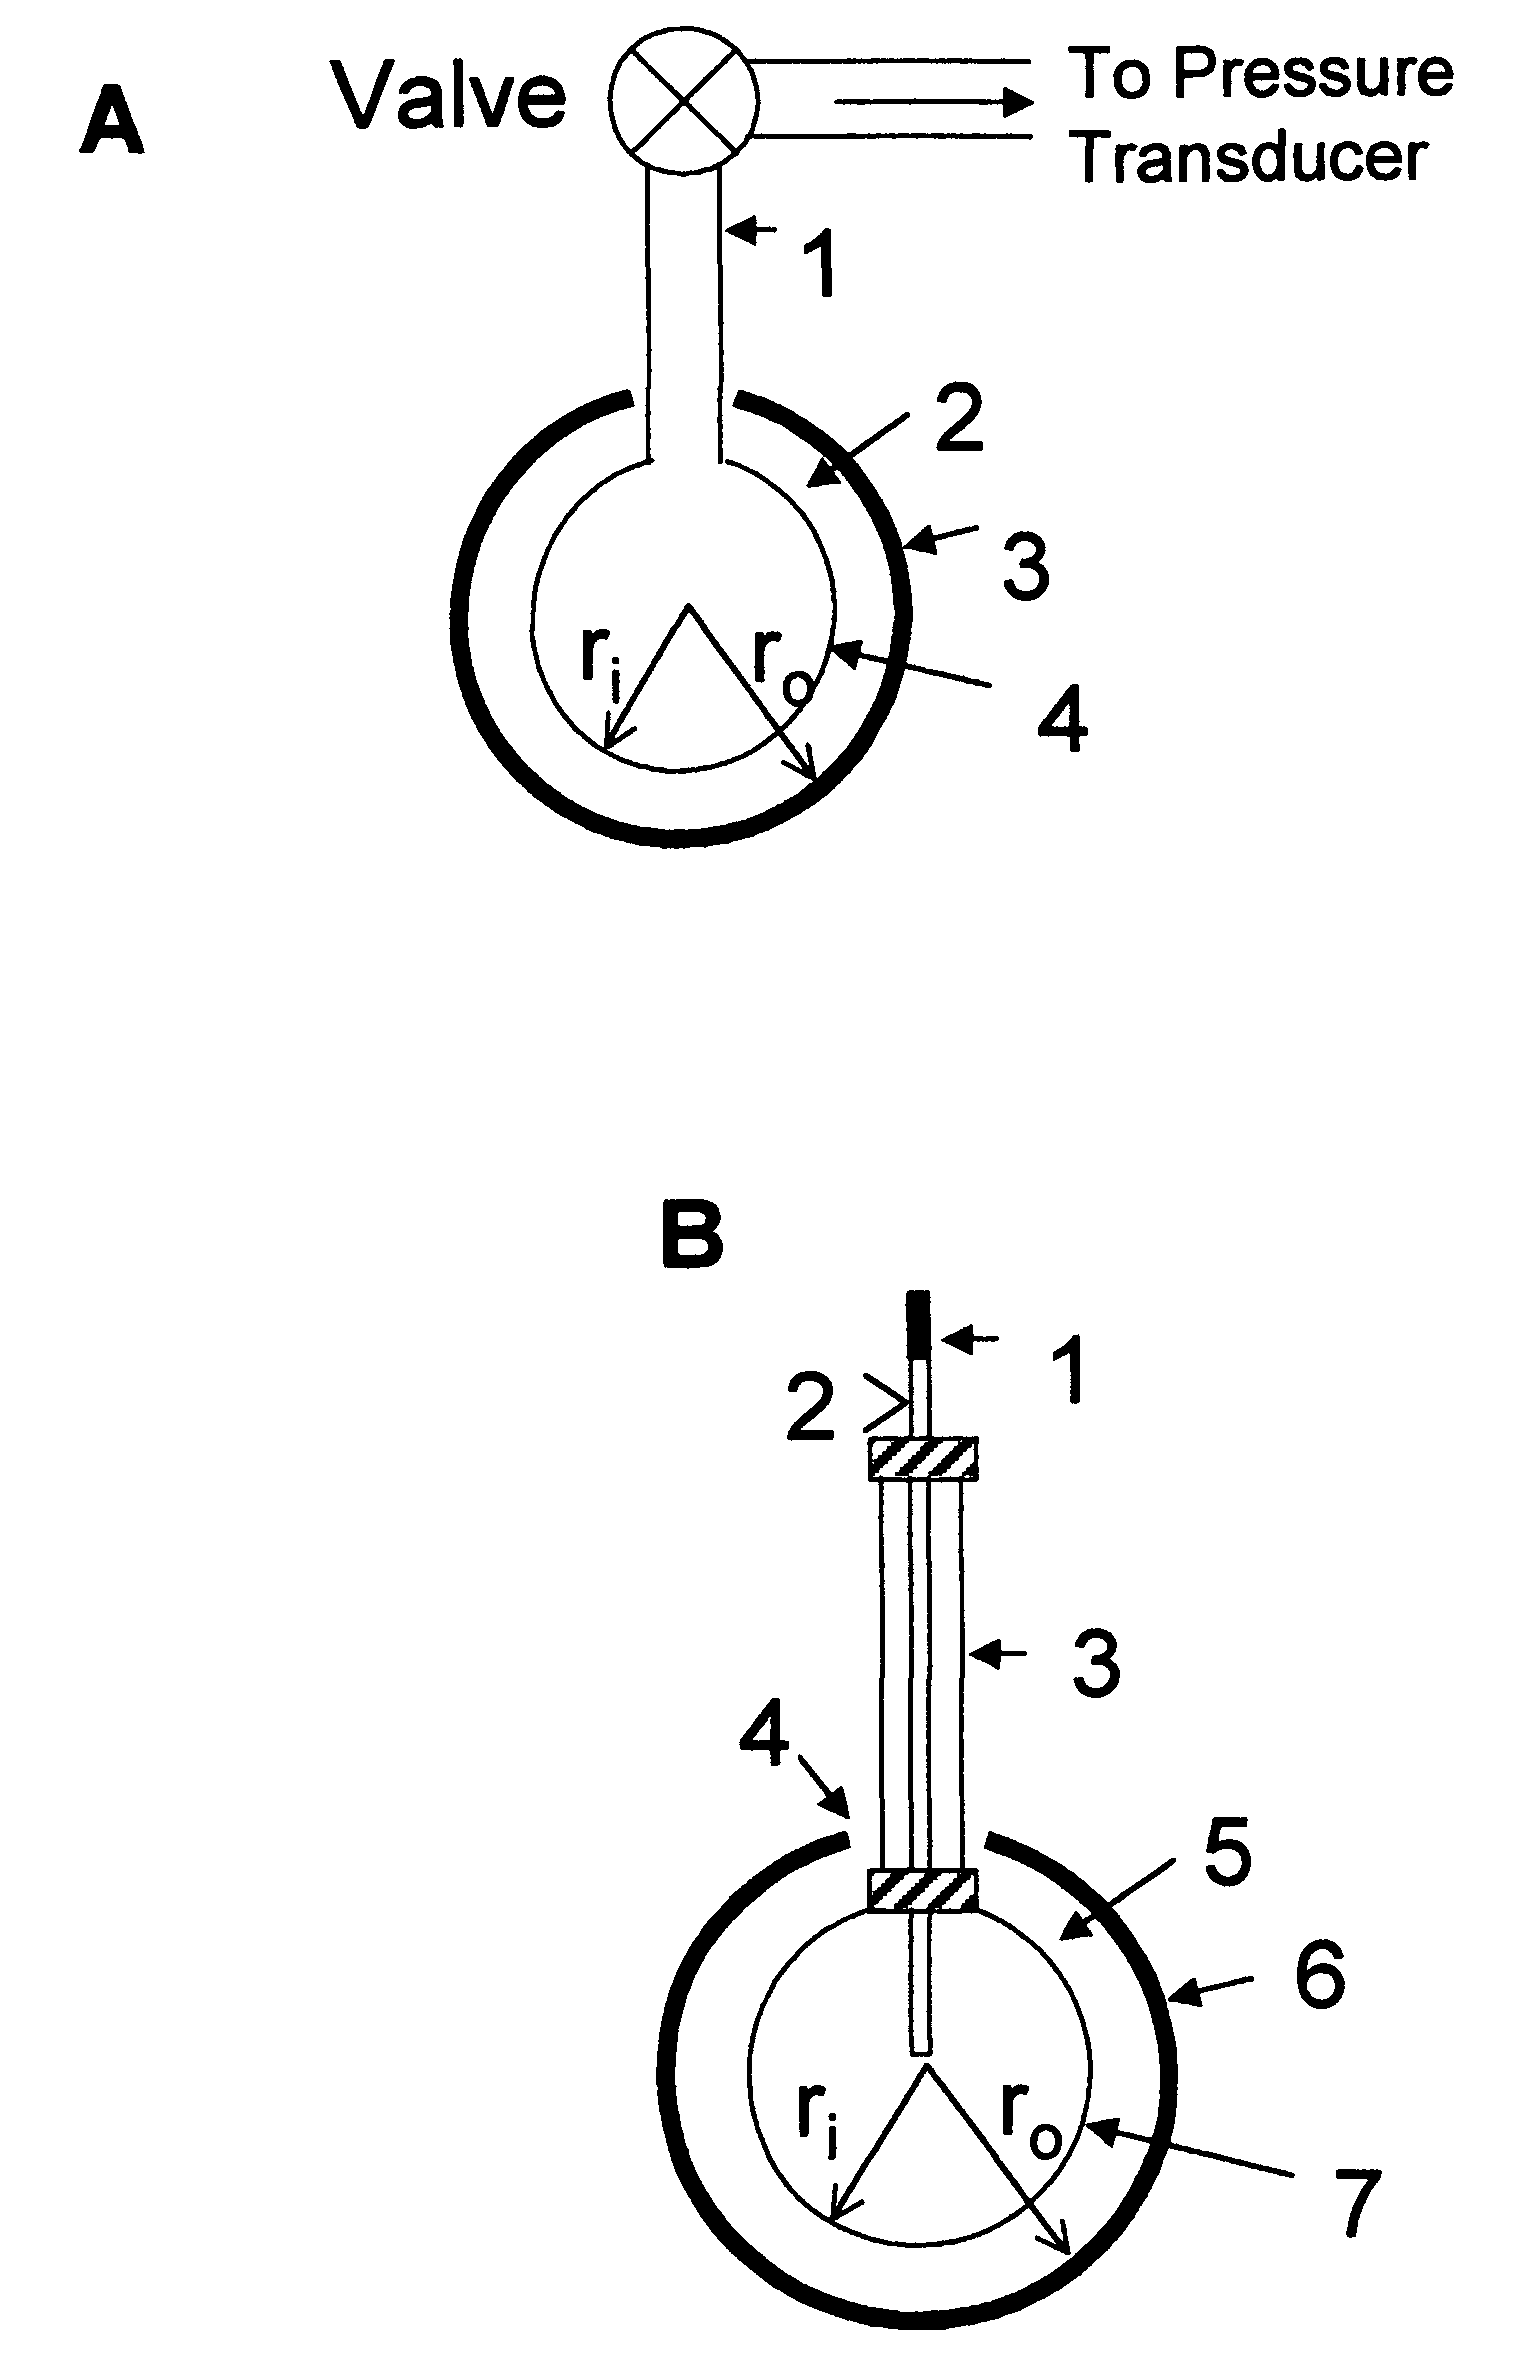 Apparatus and method to measure platelet contractility